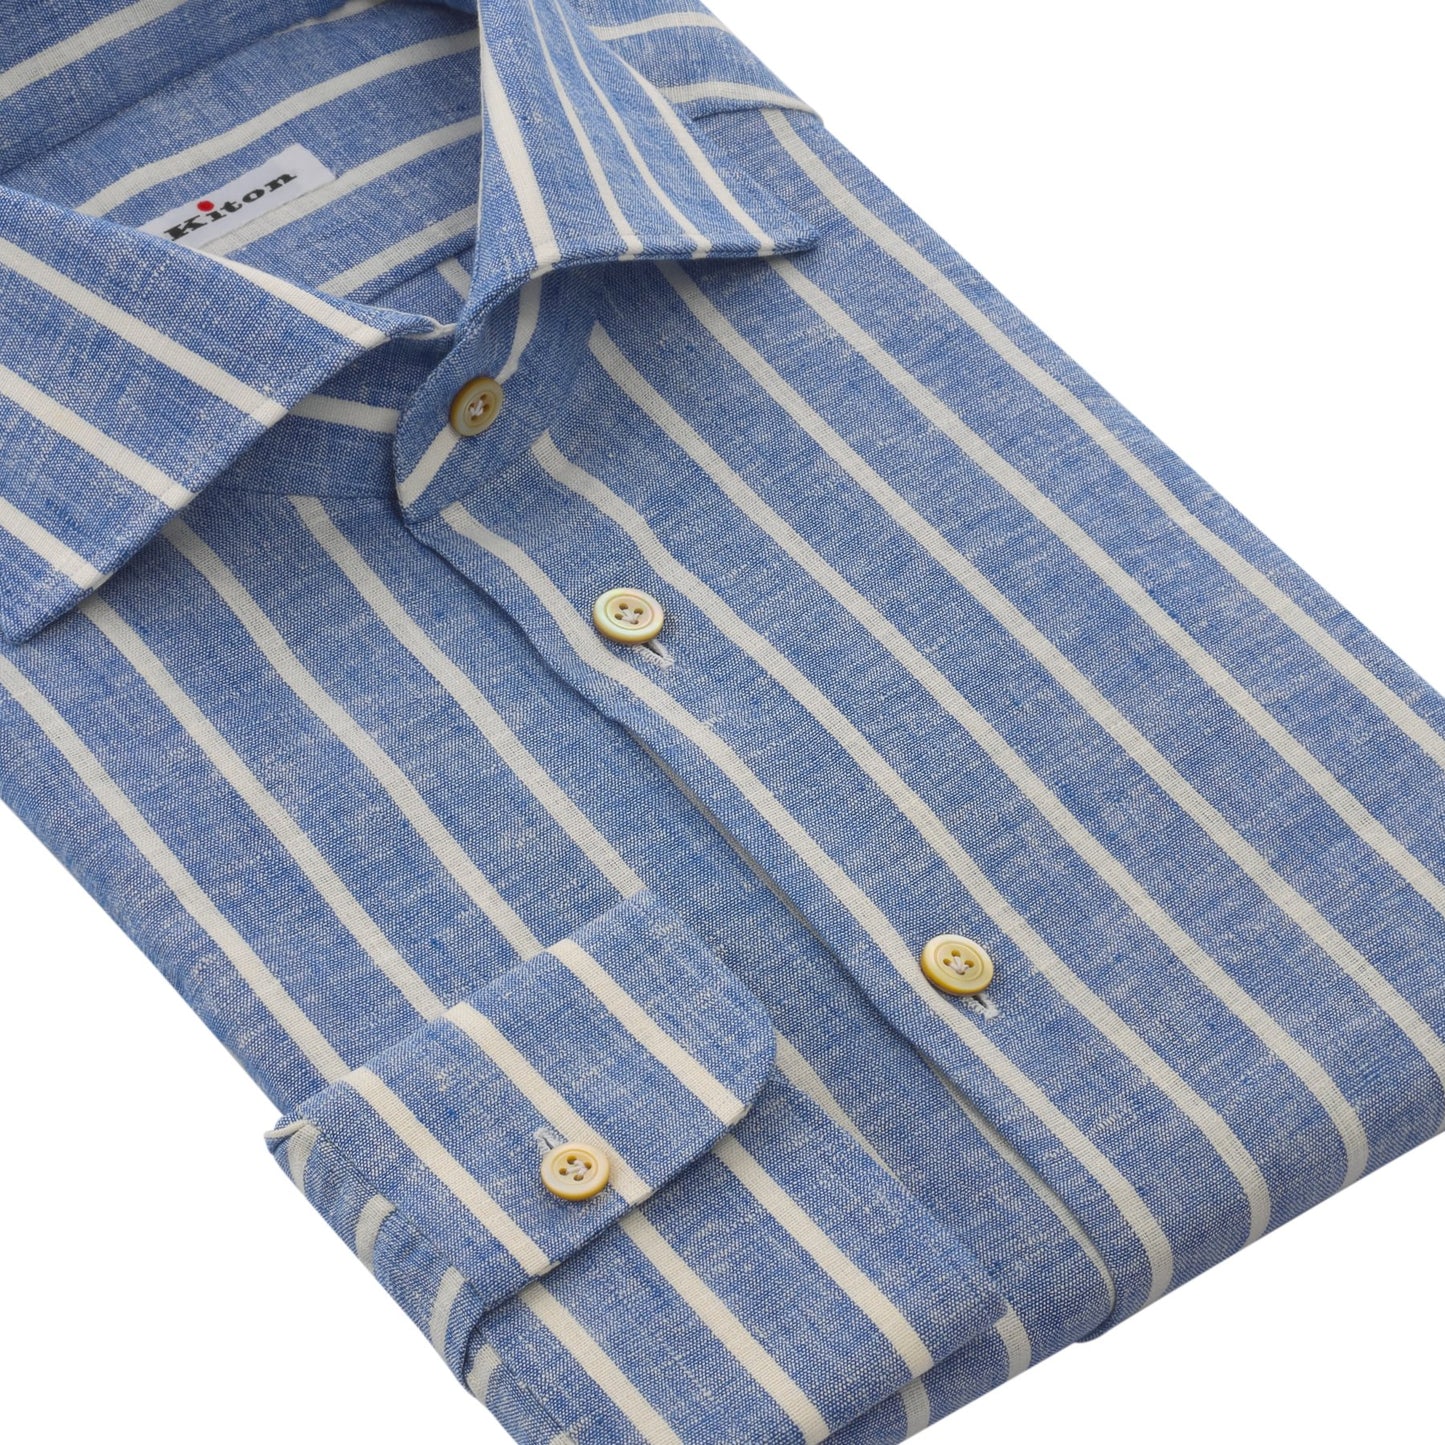 Kiton Linen-Blend Striped Shirt in Light Blue and White - SARTALE